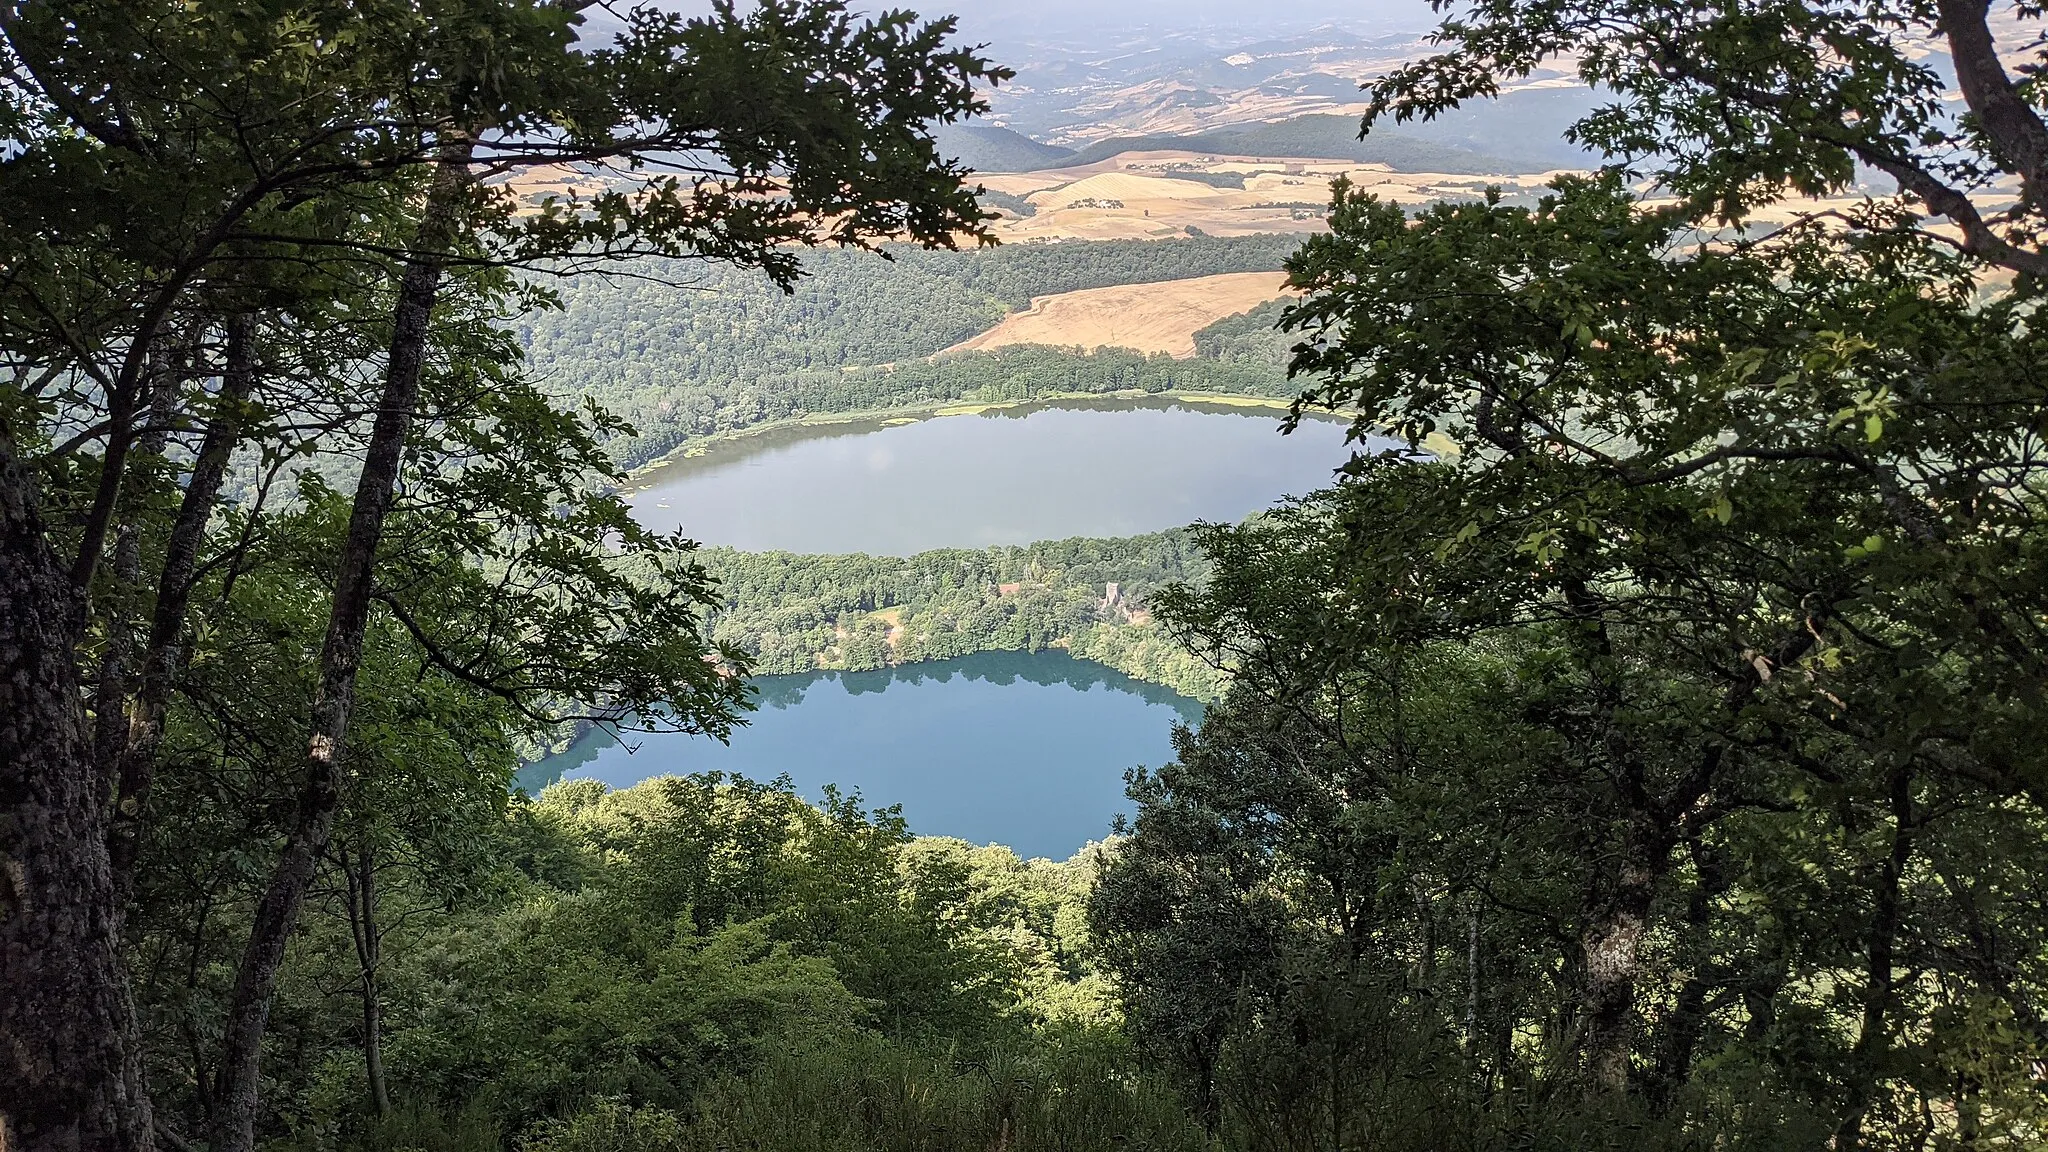 Photo showing: The Monticchio Lakes seen from the highest "Belvedere" spot on Mount Vulture (around 1080m over sea level). The closest one is the "small lake" (Lago Piccolo), the one further away is the "big lake" (Lago Grande).